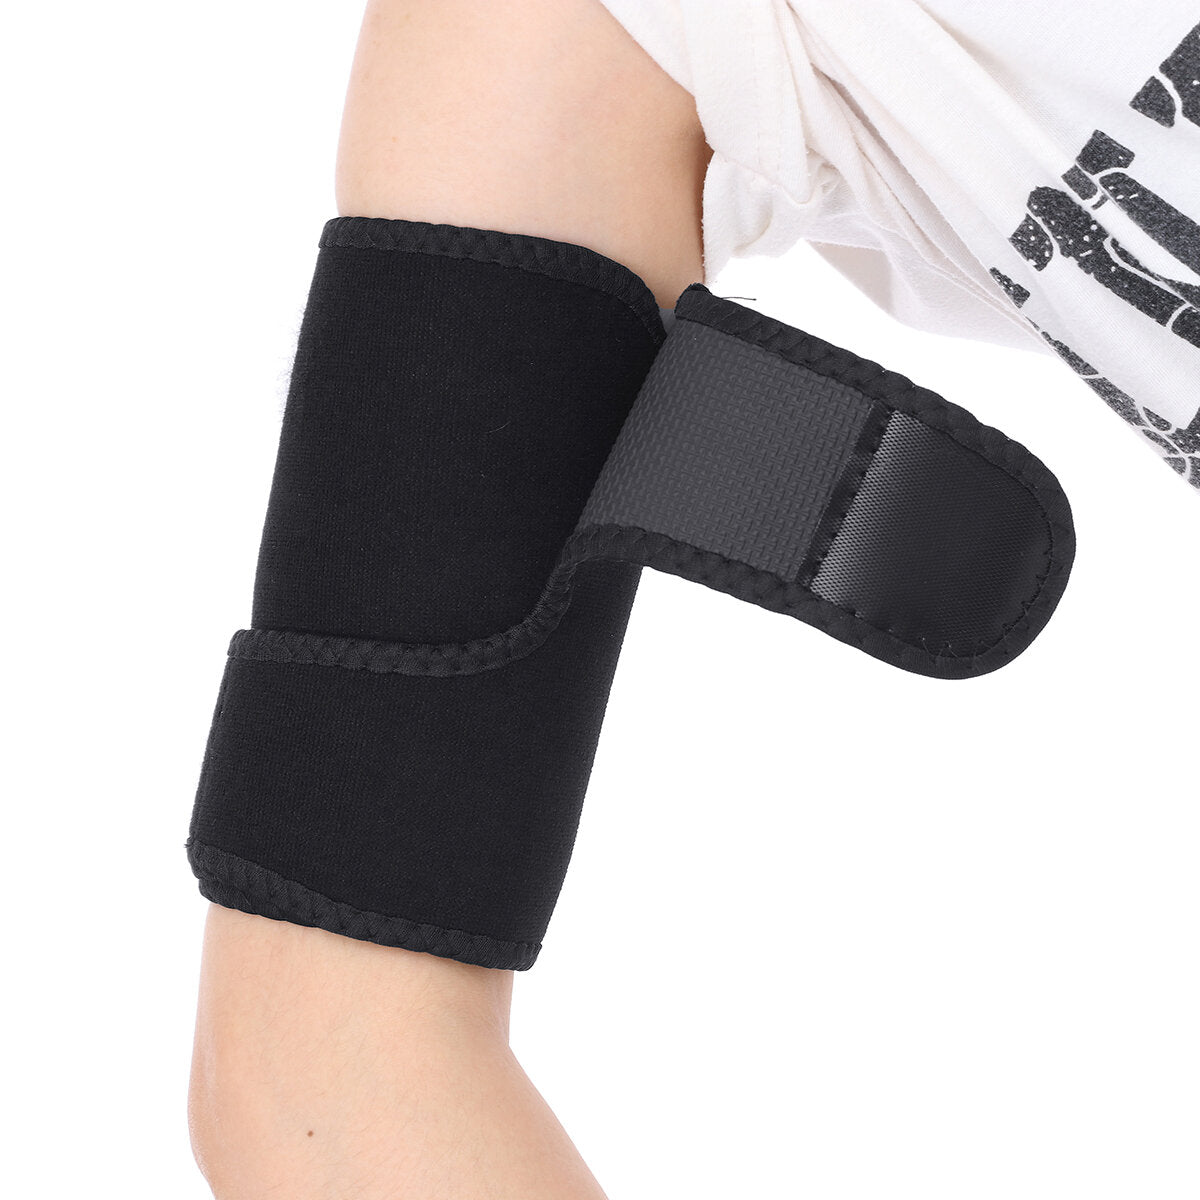 4PCS Kit Arm and Thigh Sport Protective Straps Trimmers Tape Body Exercise Wraps Adjustable Improve Sweating for Women Men